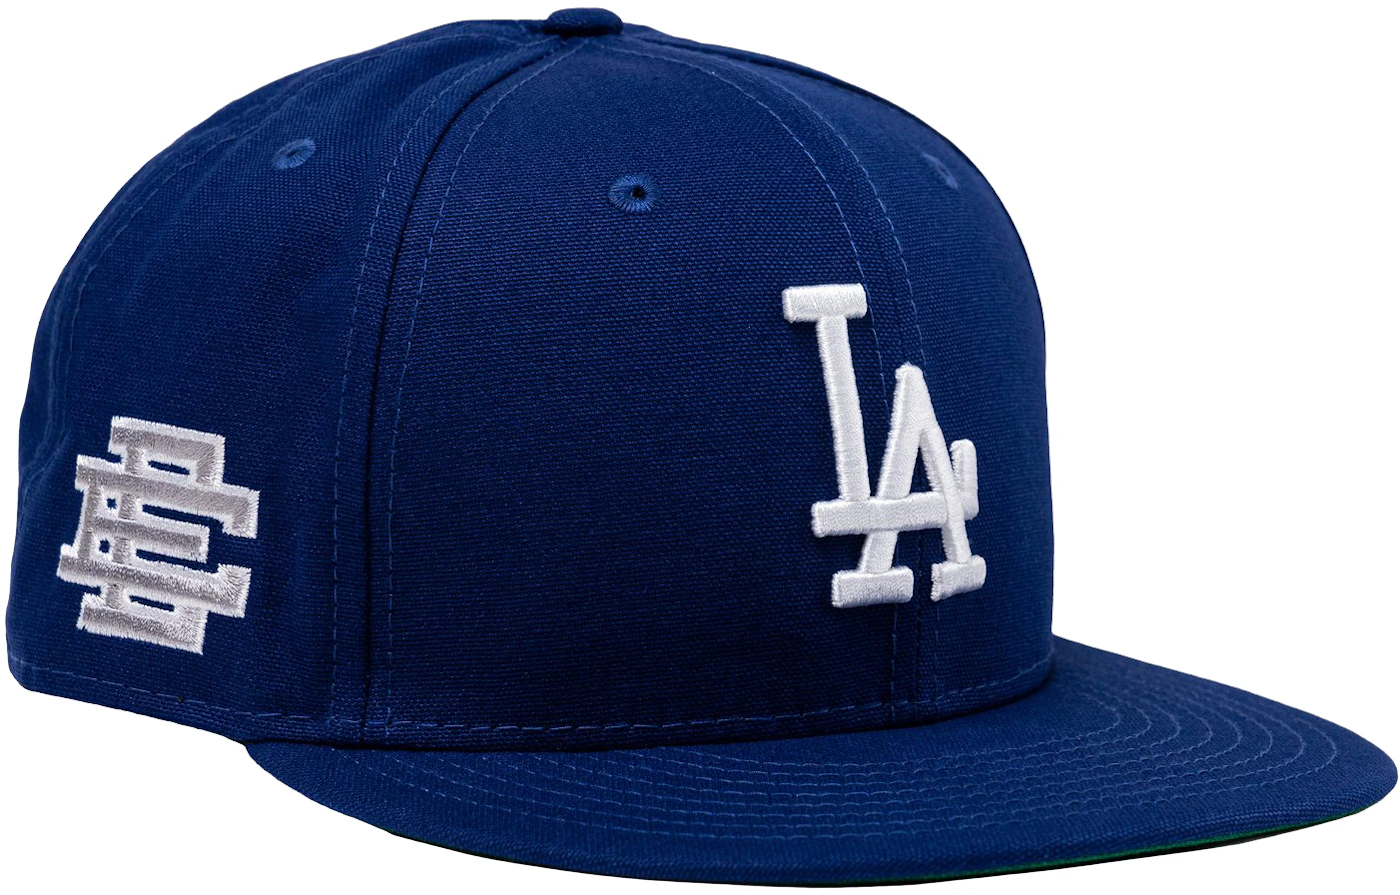 Eric Emanuel EE Los Angeles Dodgers NE 59Fifty Fitted Hat Royal Blue ...